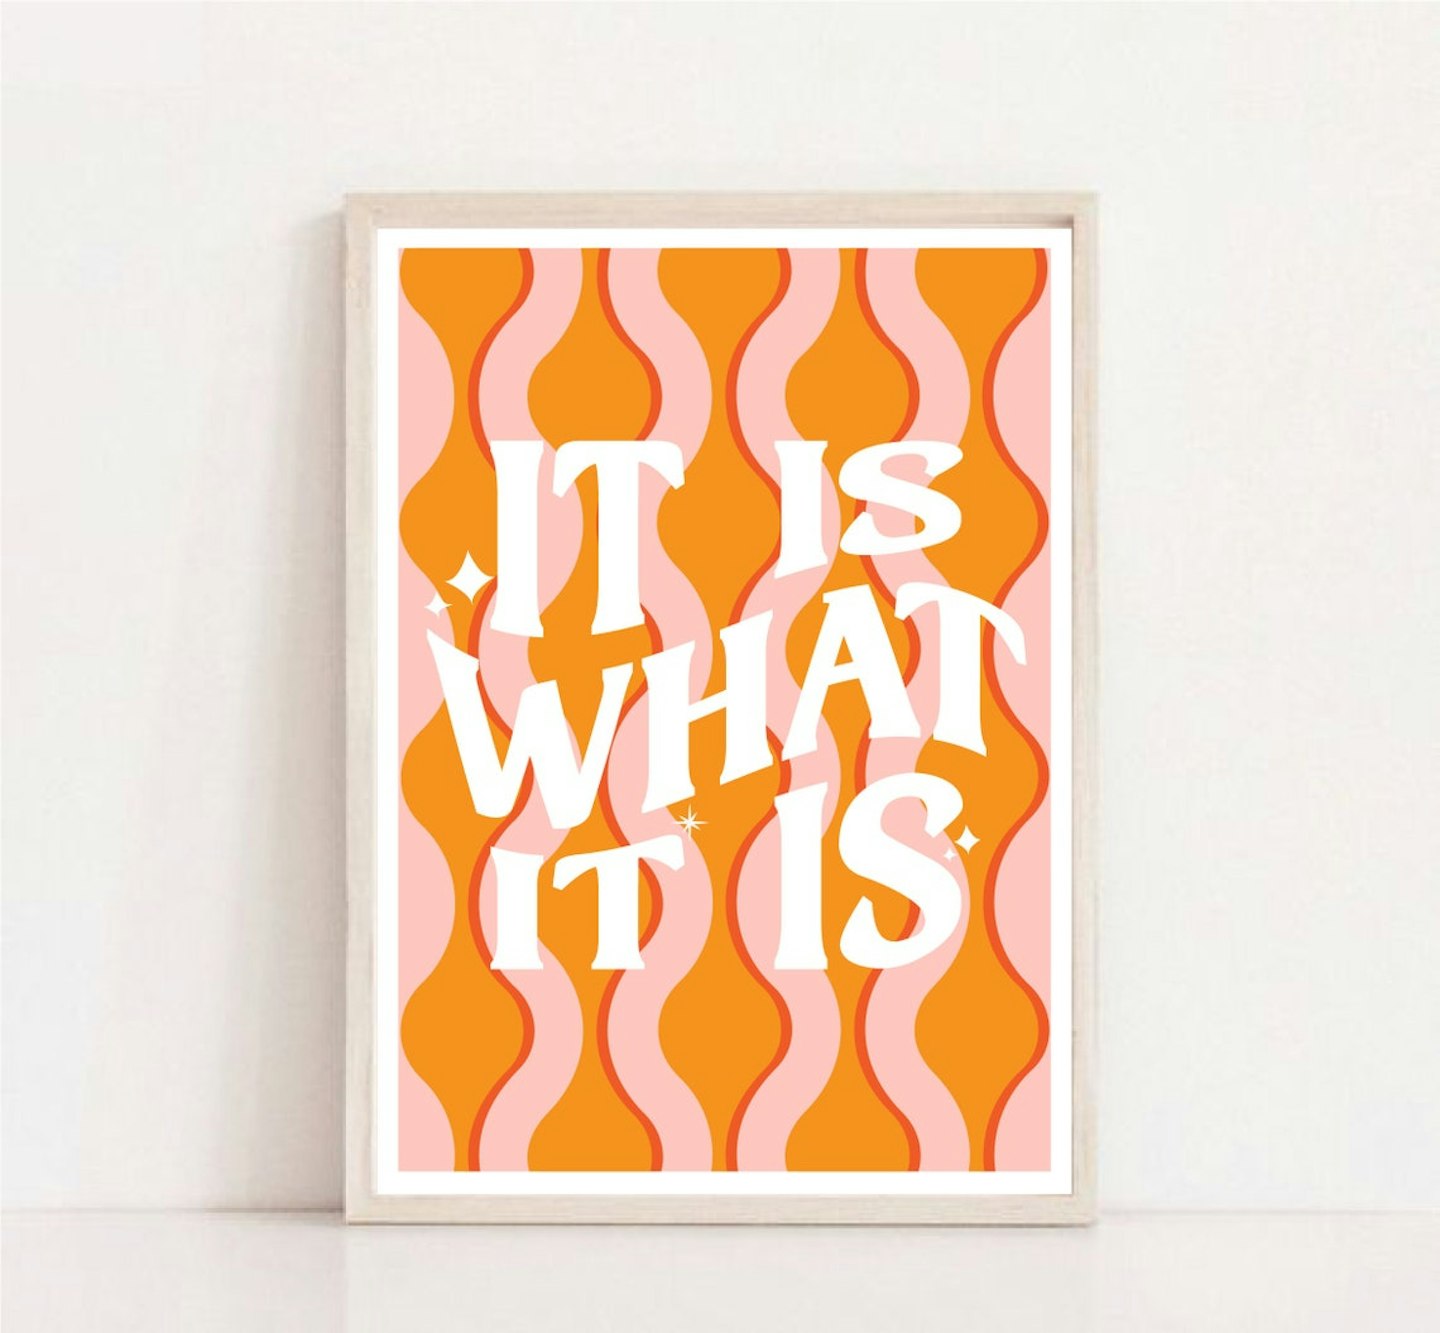 Etsy, It Is What It Is Wall Art Print, From £3